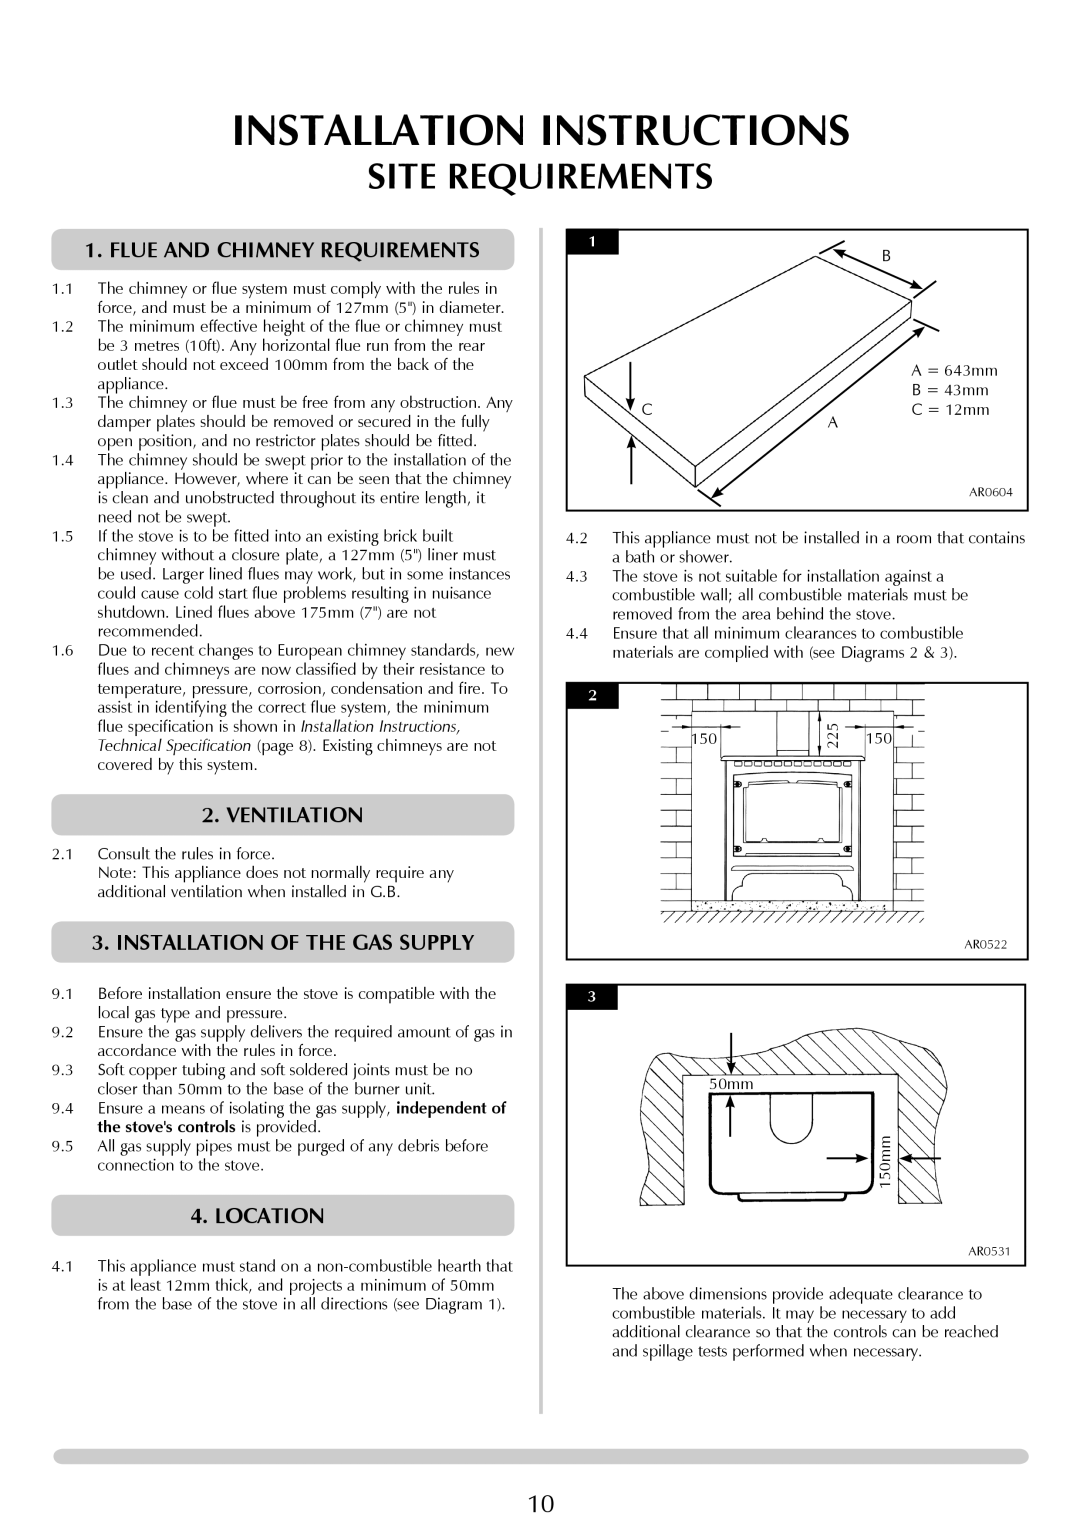 Yeoman PR1145 instruction manual Site Requirements, Flue and Chimney Requirements, Installation of the gas supply, Location 